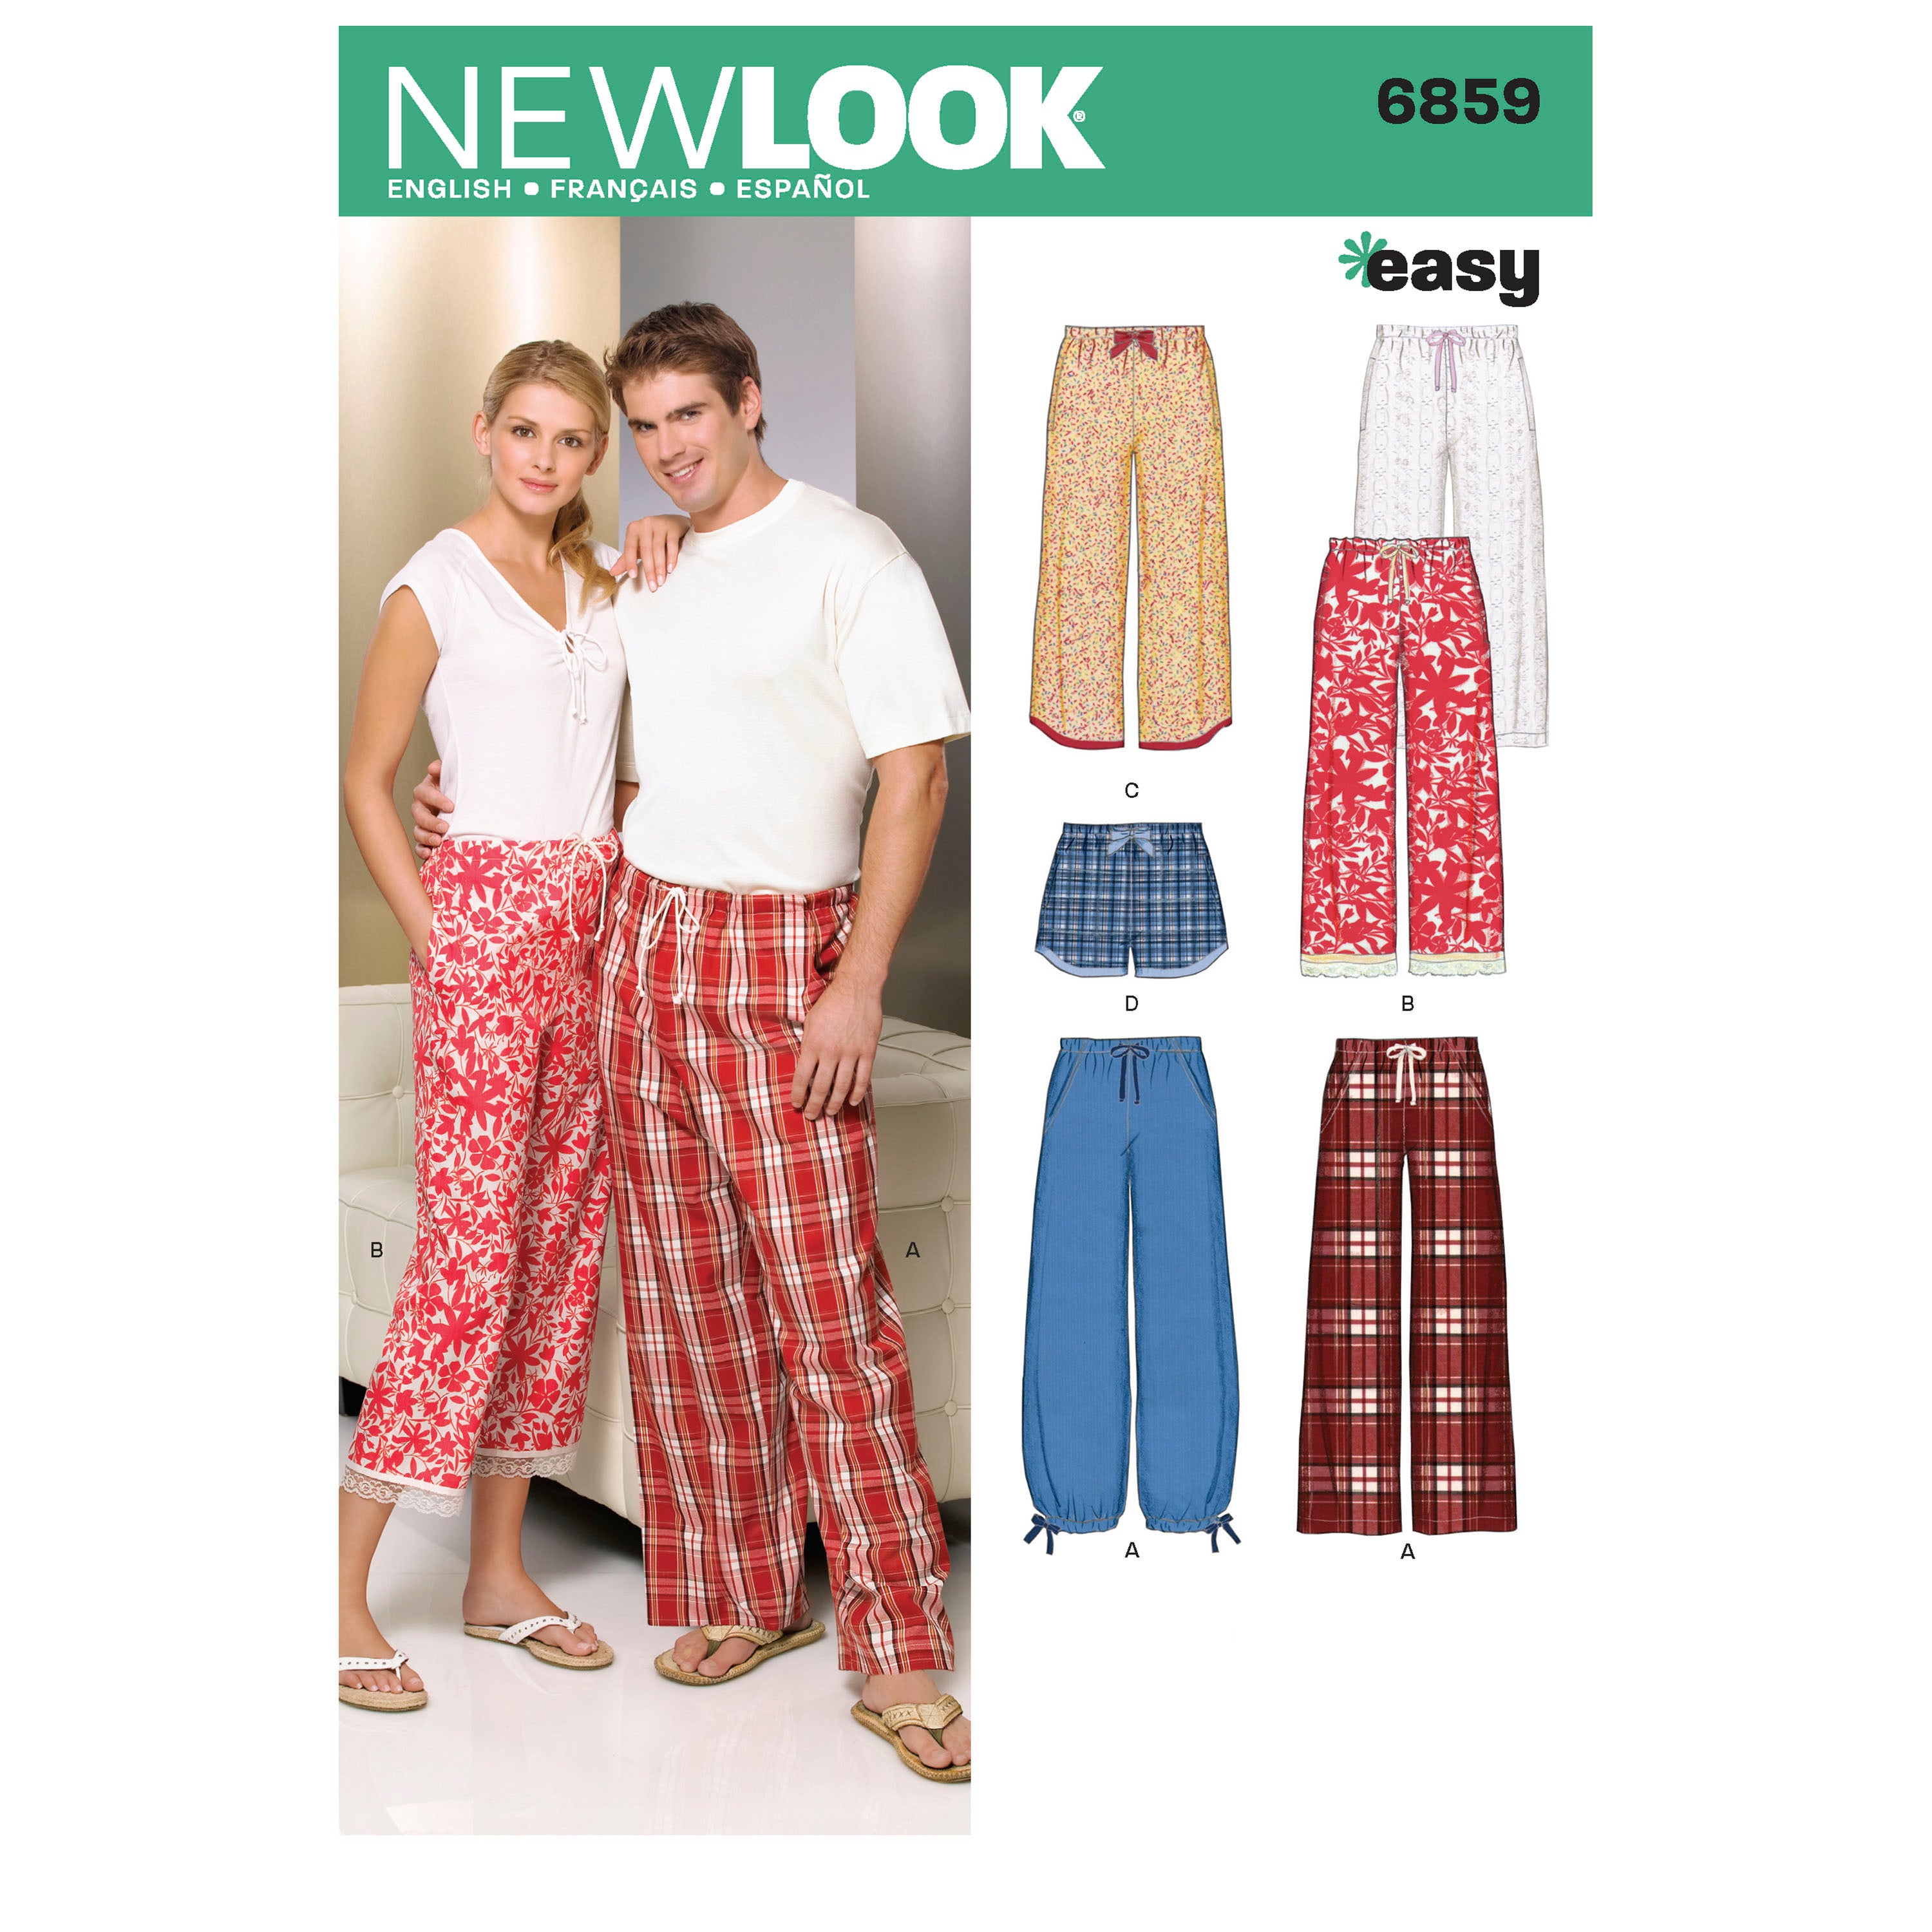 New Look Sewing Pattern 6859 - Miss/Men Separates – My Sewing Box